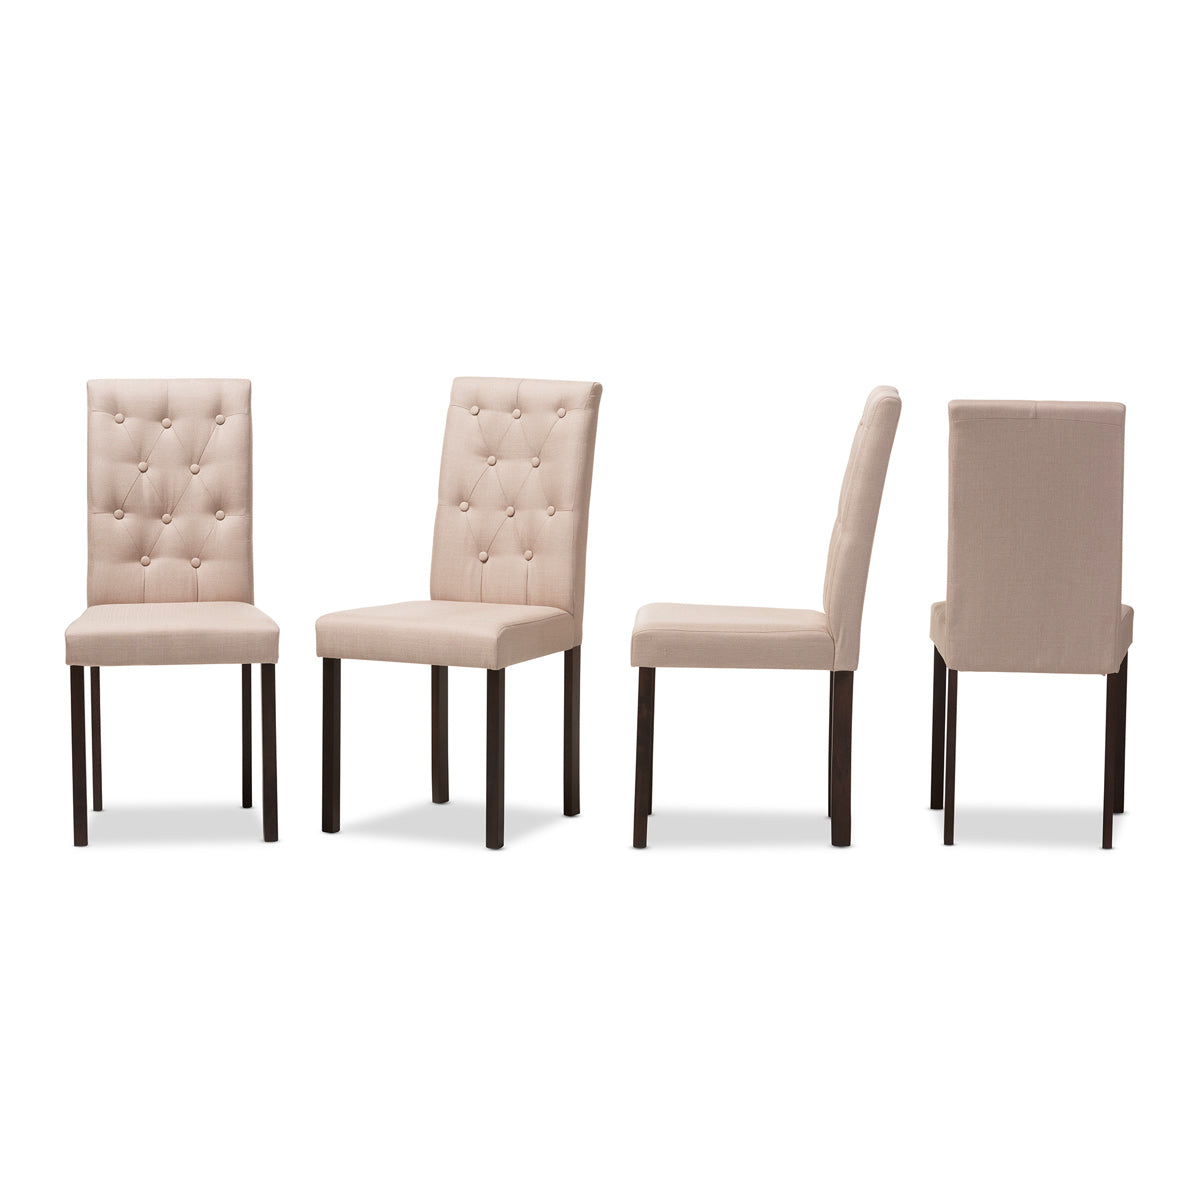 Baxton Studio Gardner Modern and Contemporary Dark Brown Finished Beige Fabric Upholstered Dining Chair (Set of 4) Baxton Studio-dining chair-Minimal And Modern - 2